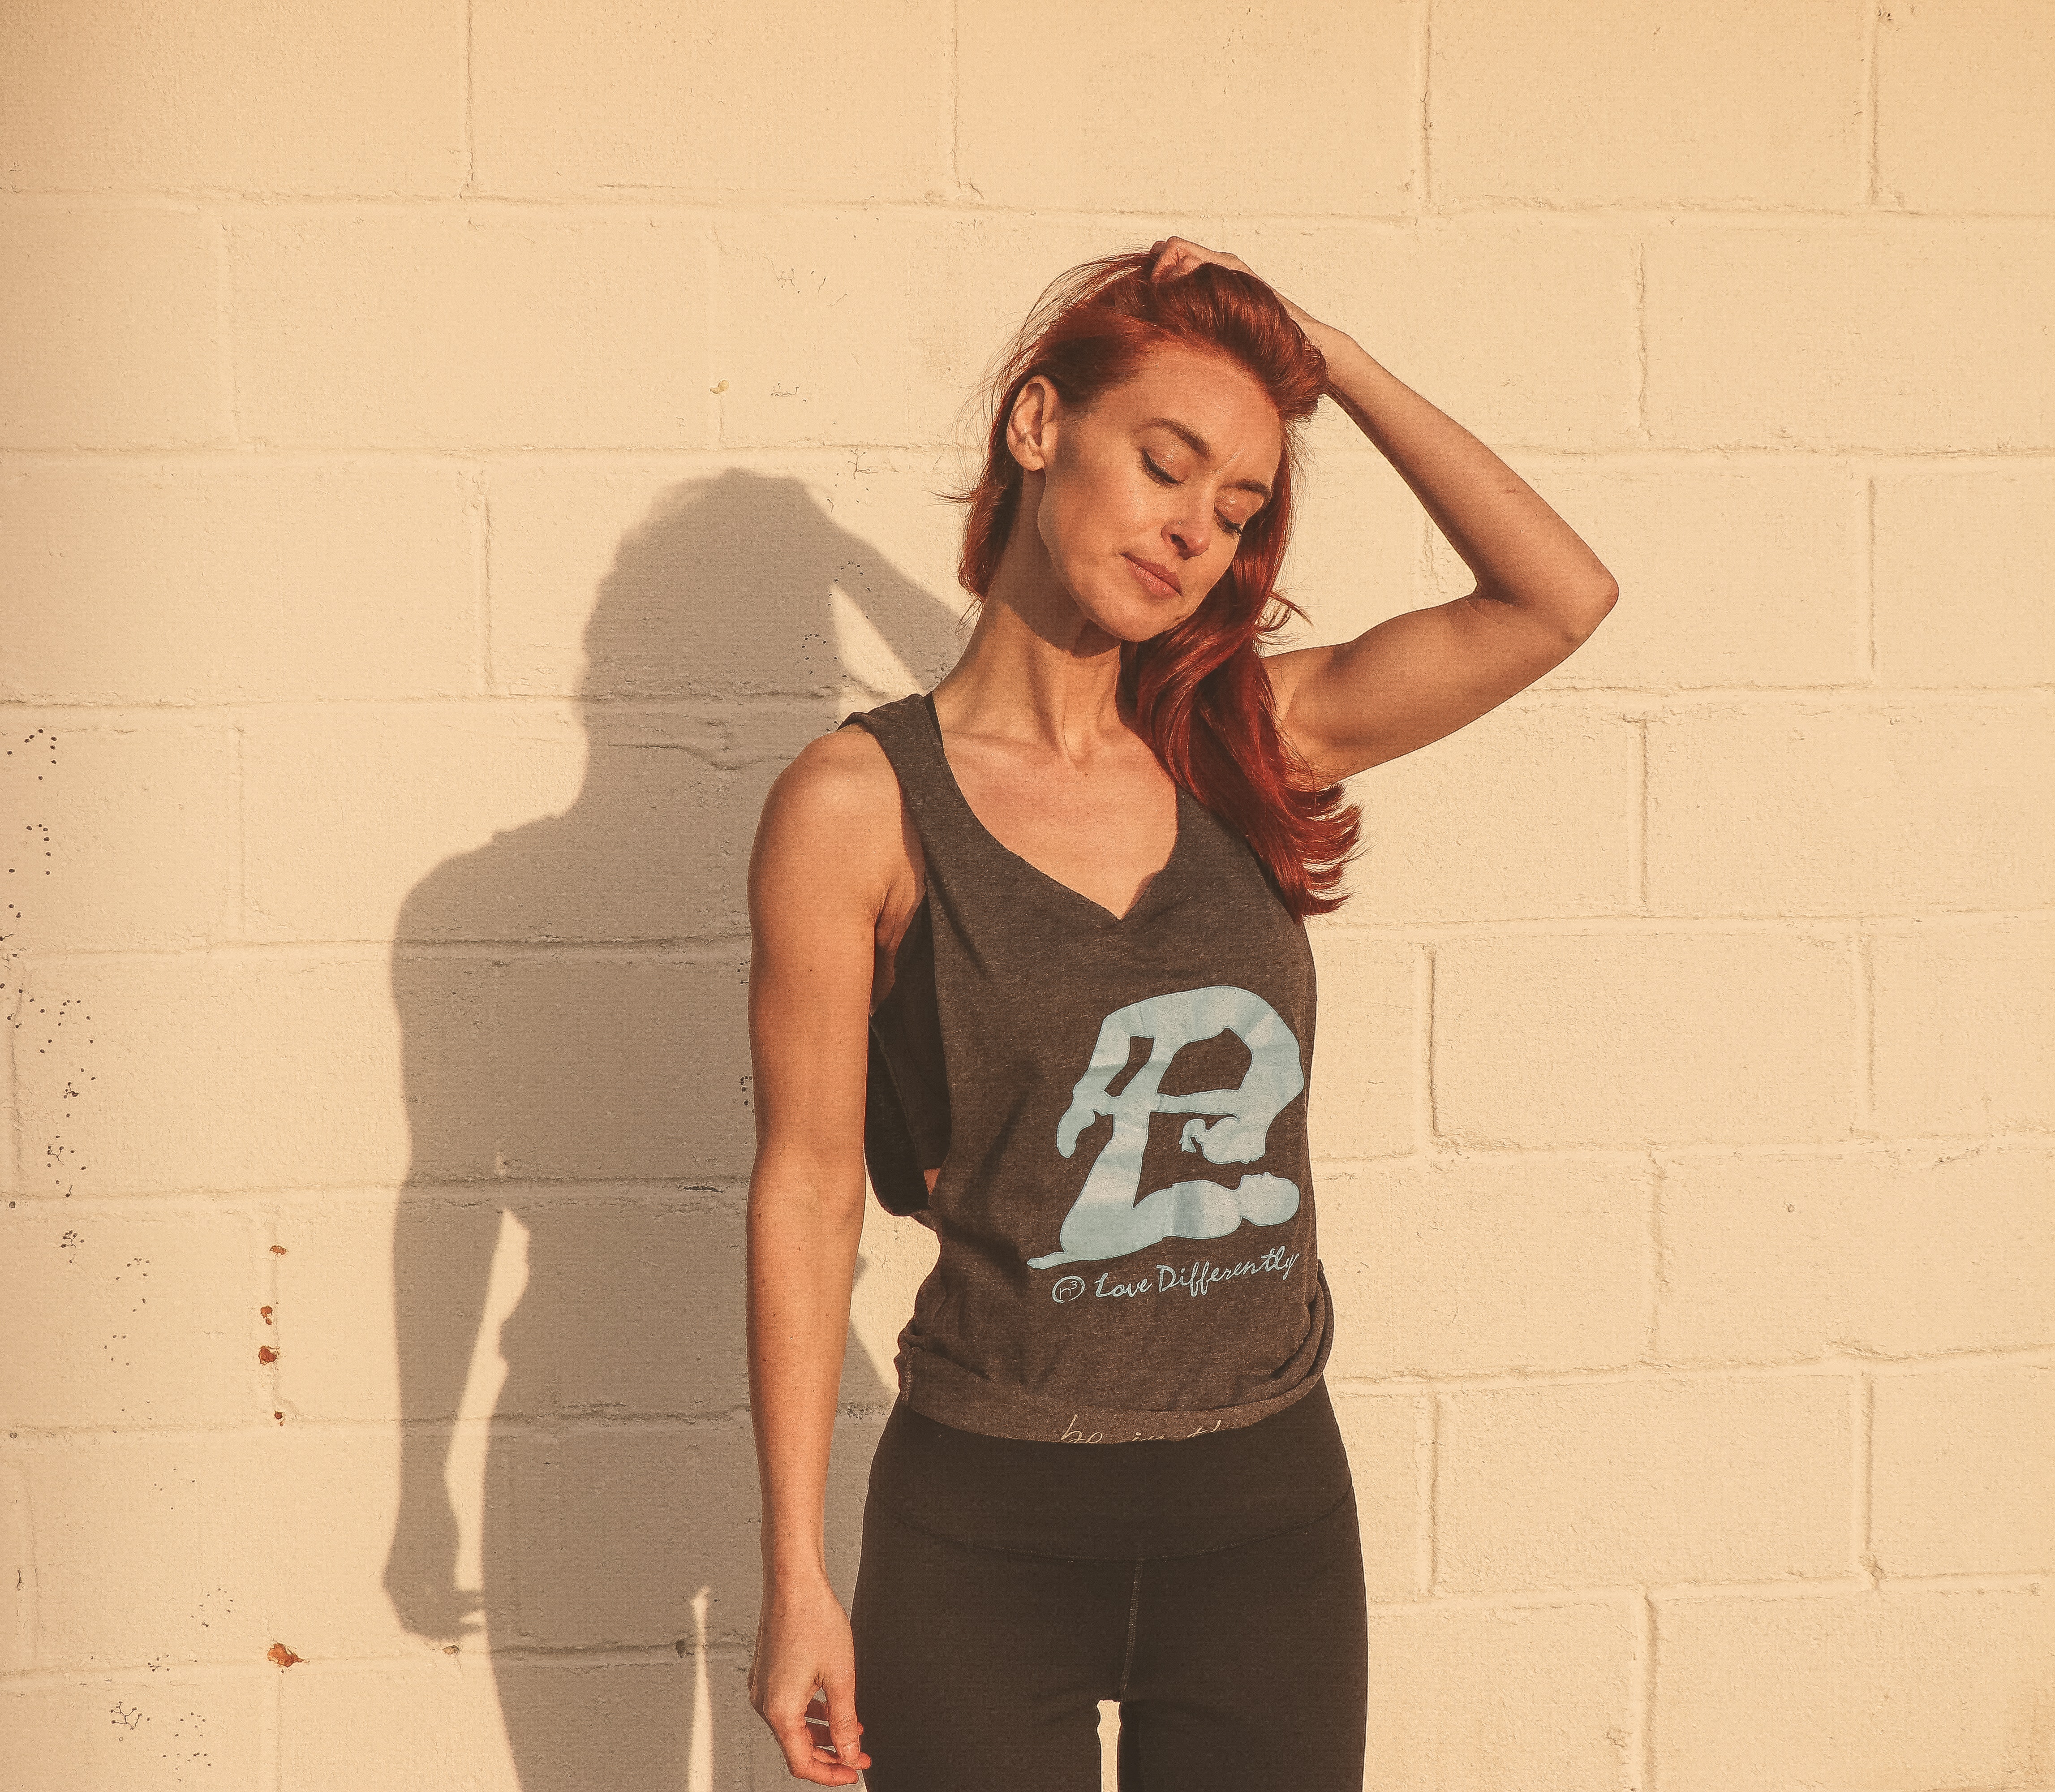 Woman in Gray and Black Tank Top Standing Near Wall, Red head, Outdoors, Pants, Person, HQ Photo